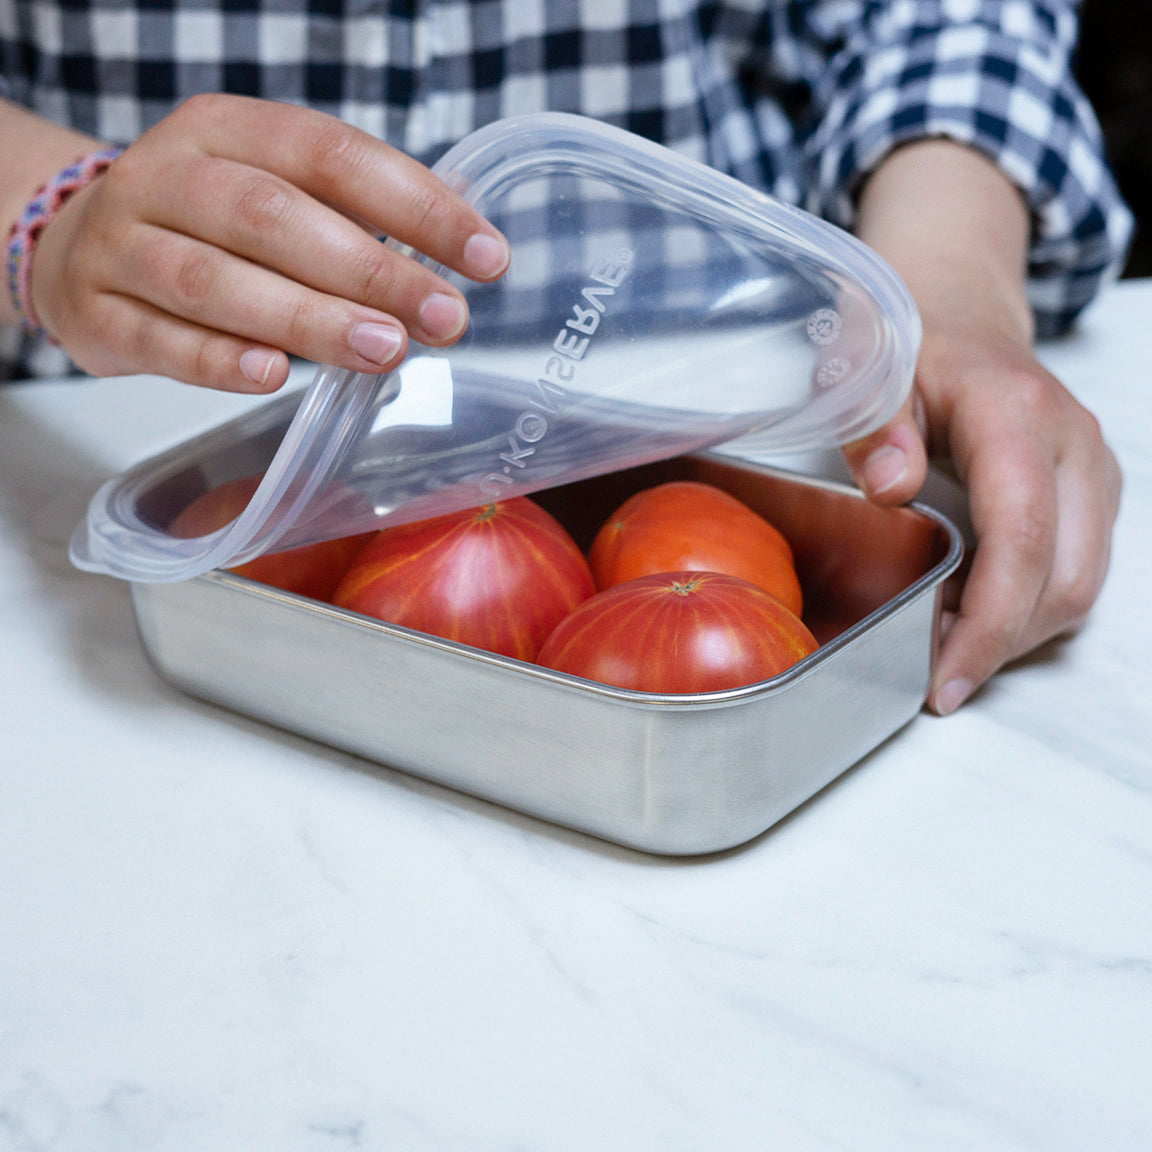 Rectangle To-Go Container (25oz) - Clear